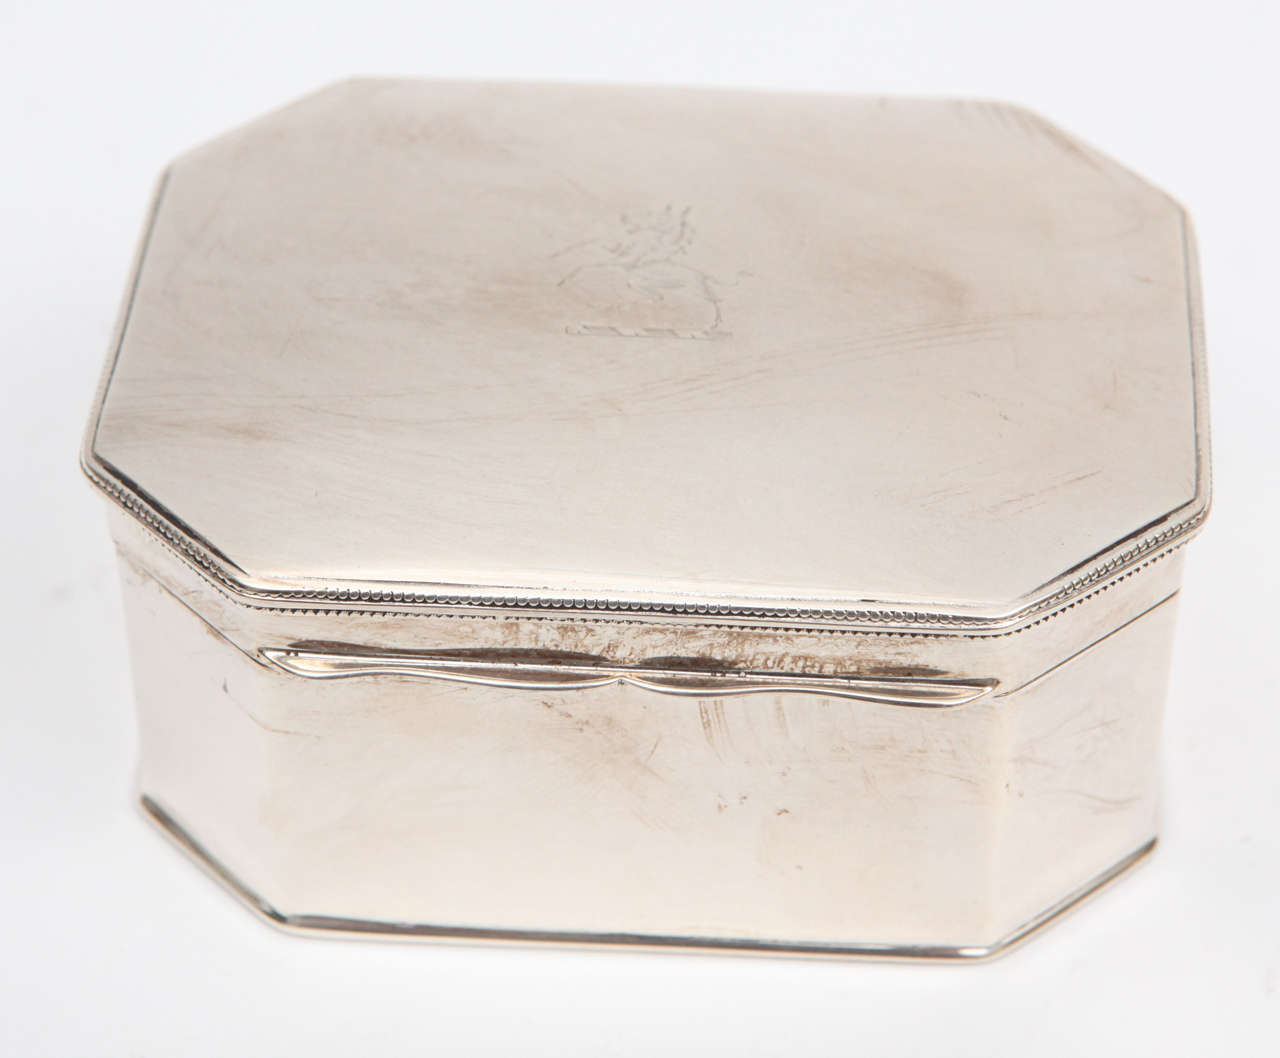 1900s English sterling box with gold wash interior. The box is hallmarked.